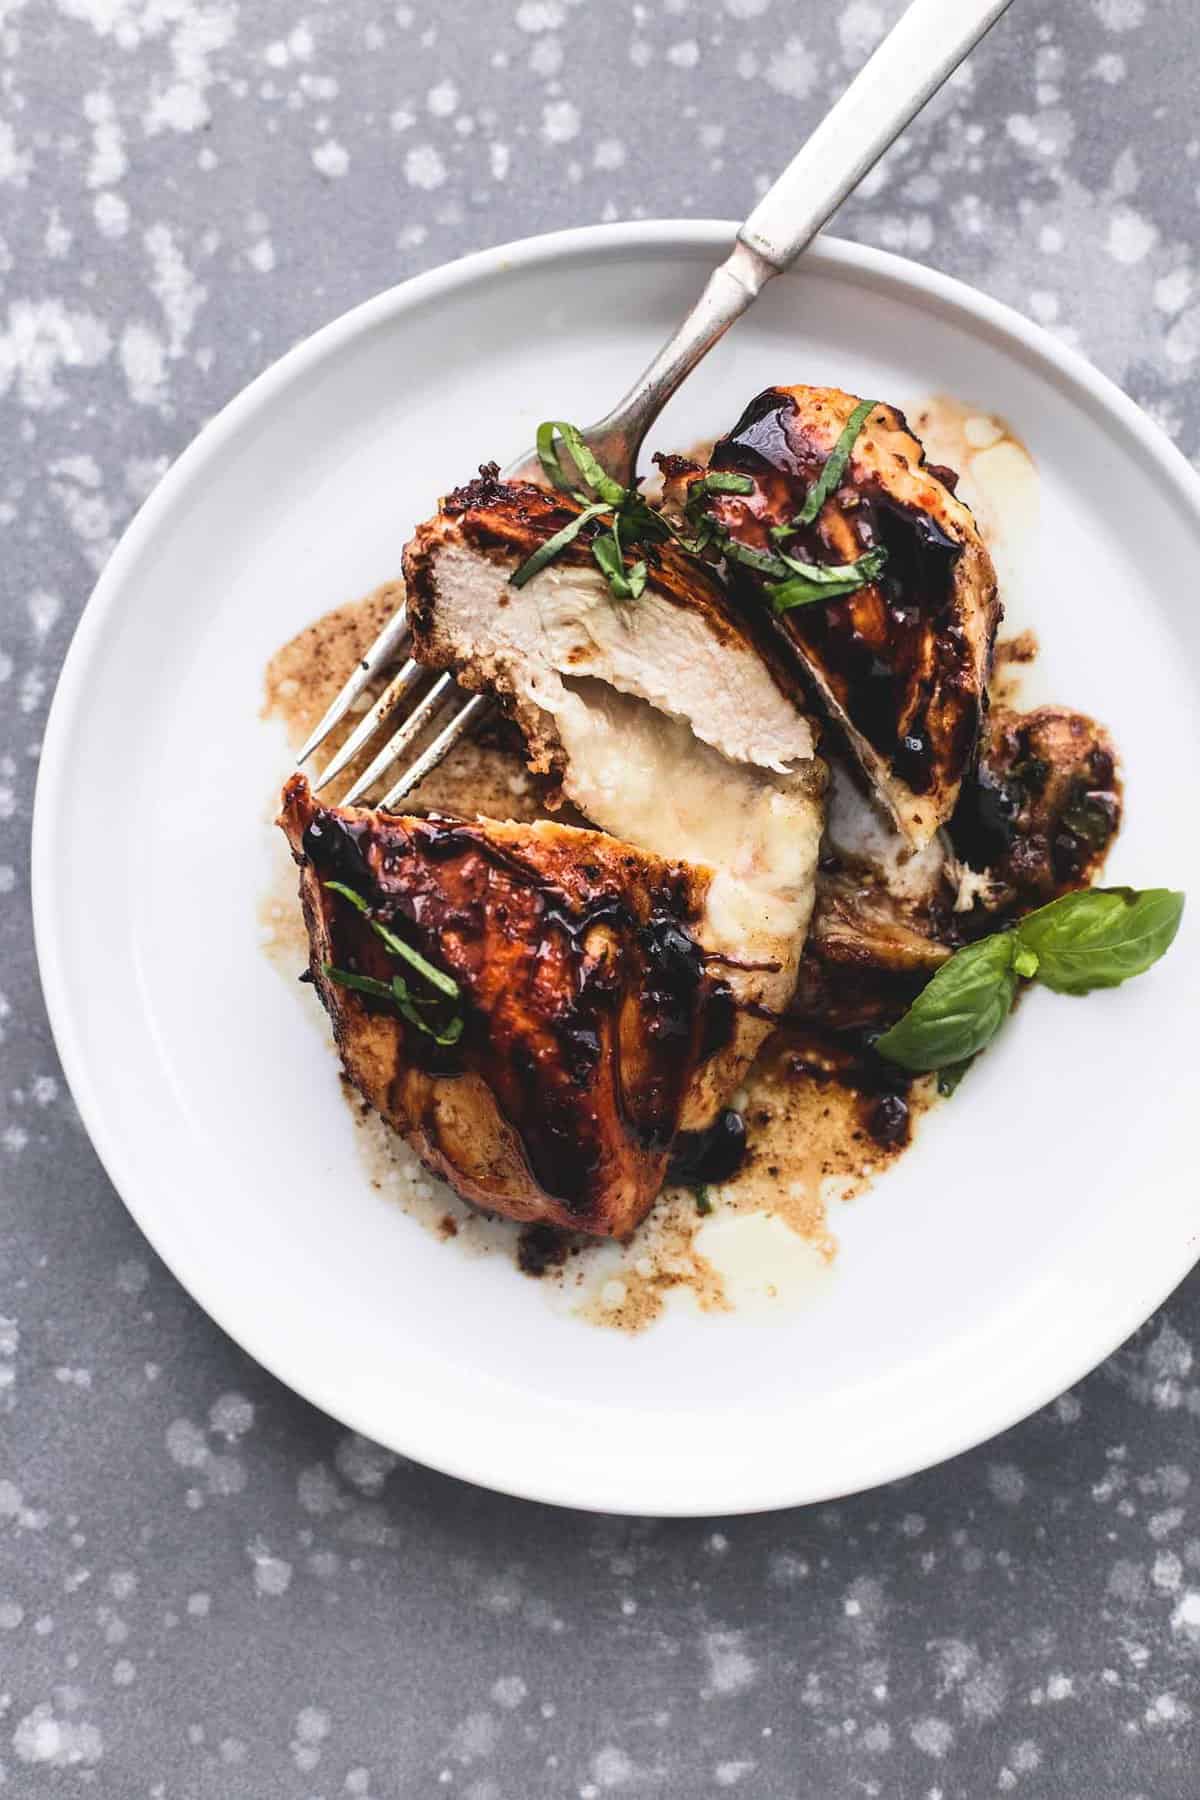 top view of three cheese stuffed balsamic chicken sliced up with a fork underneath on a plate,